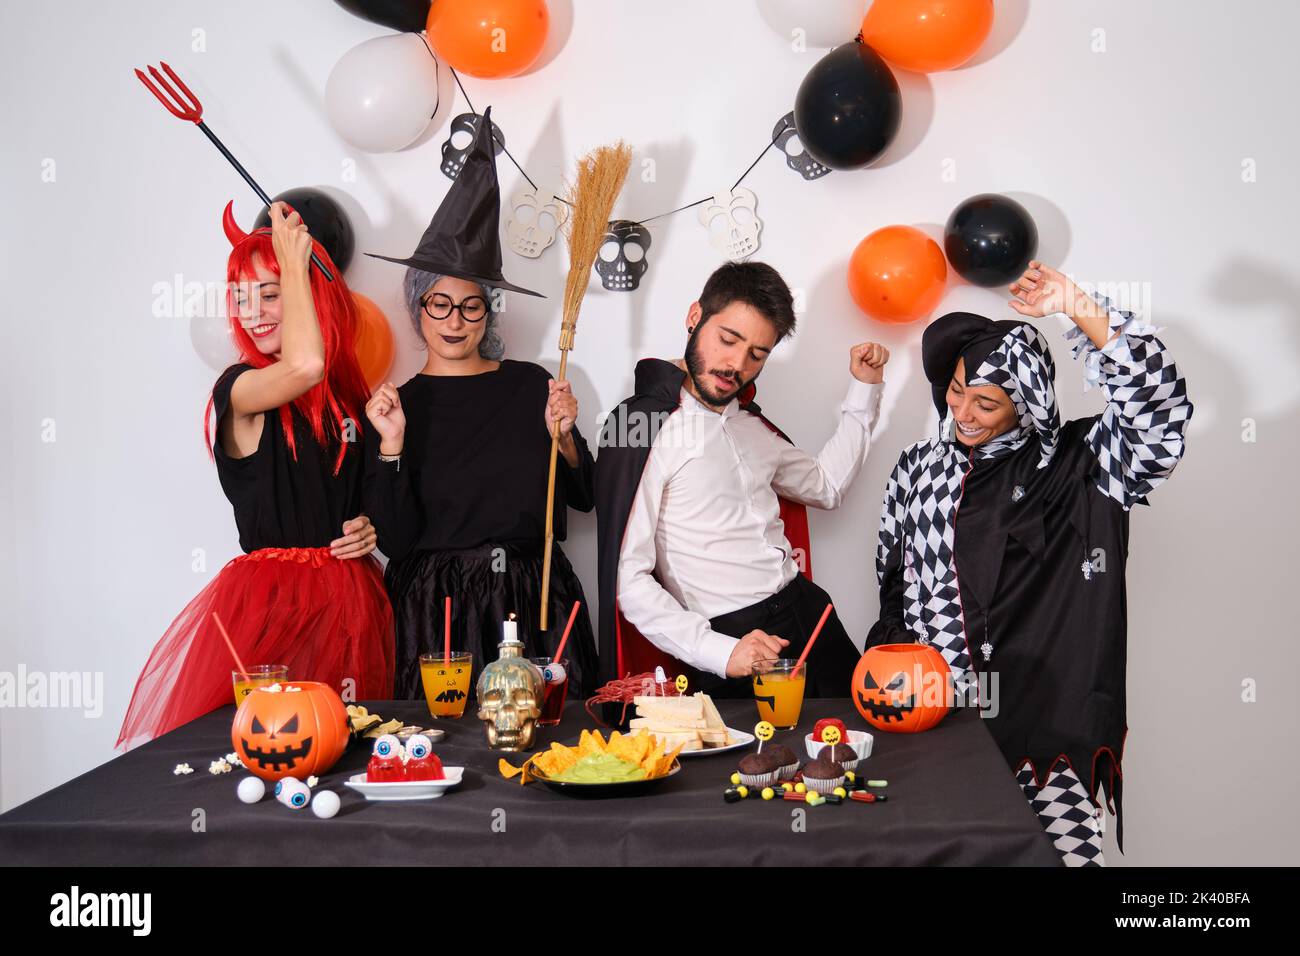 Four people dancing at a costume Halloween party. Stock Photo